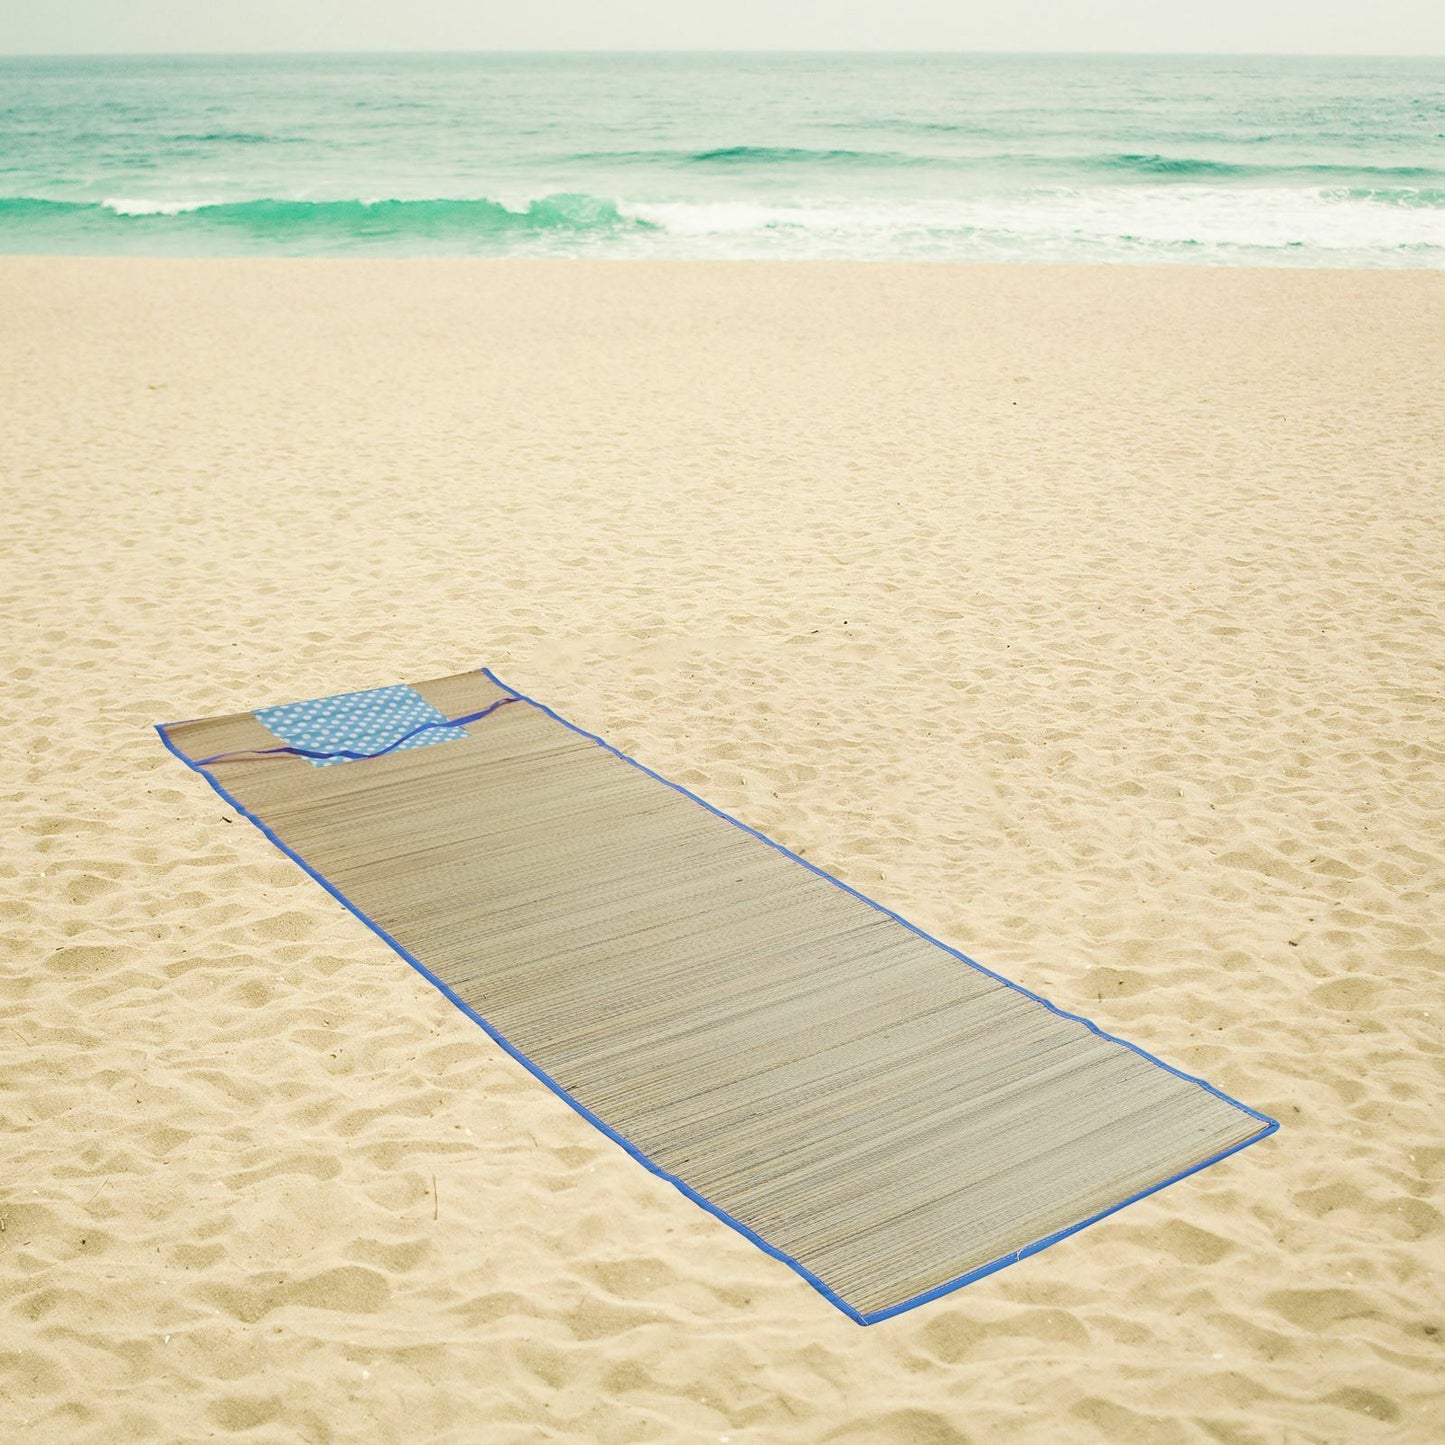 Roll Up Straw BEACH MAT Carry Mat Travel HOLIDAY Camping Festival Park Picnic